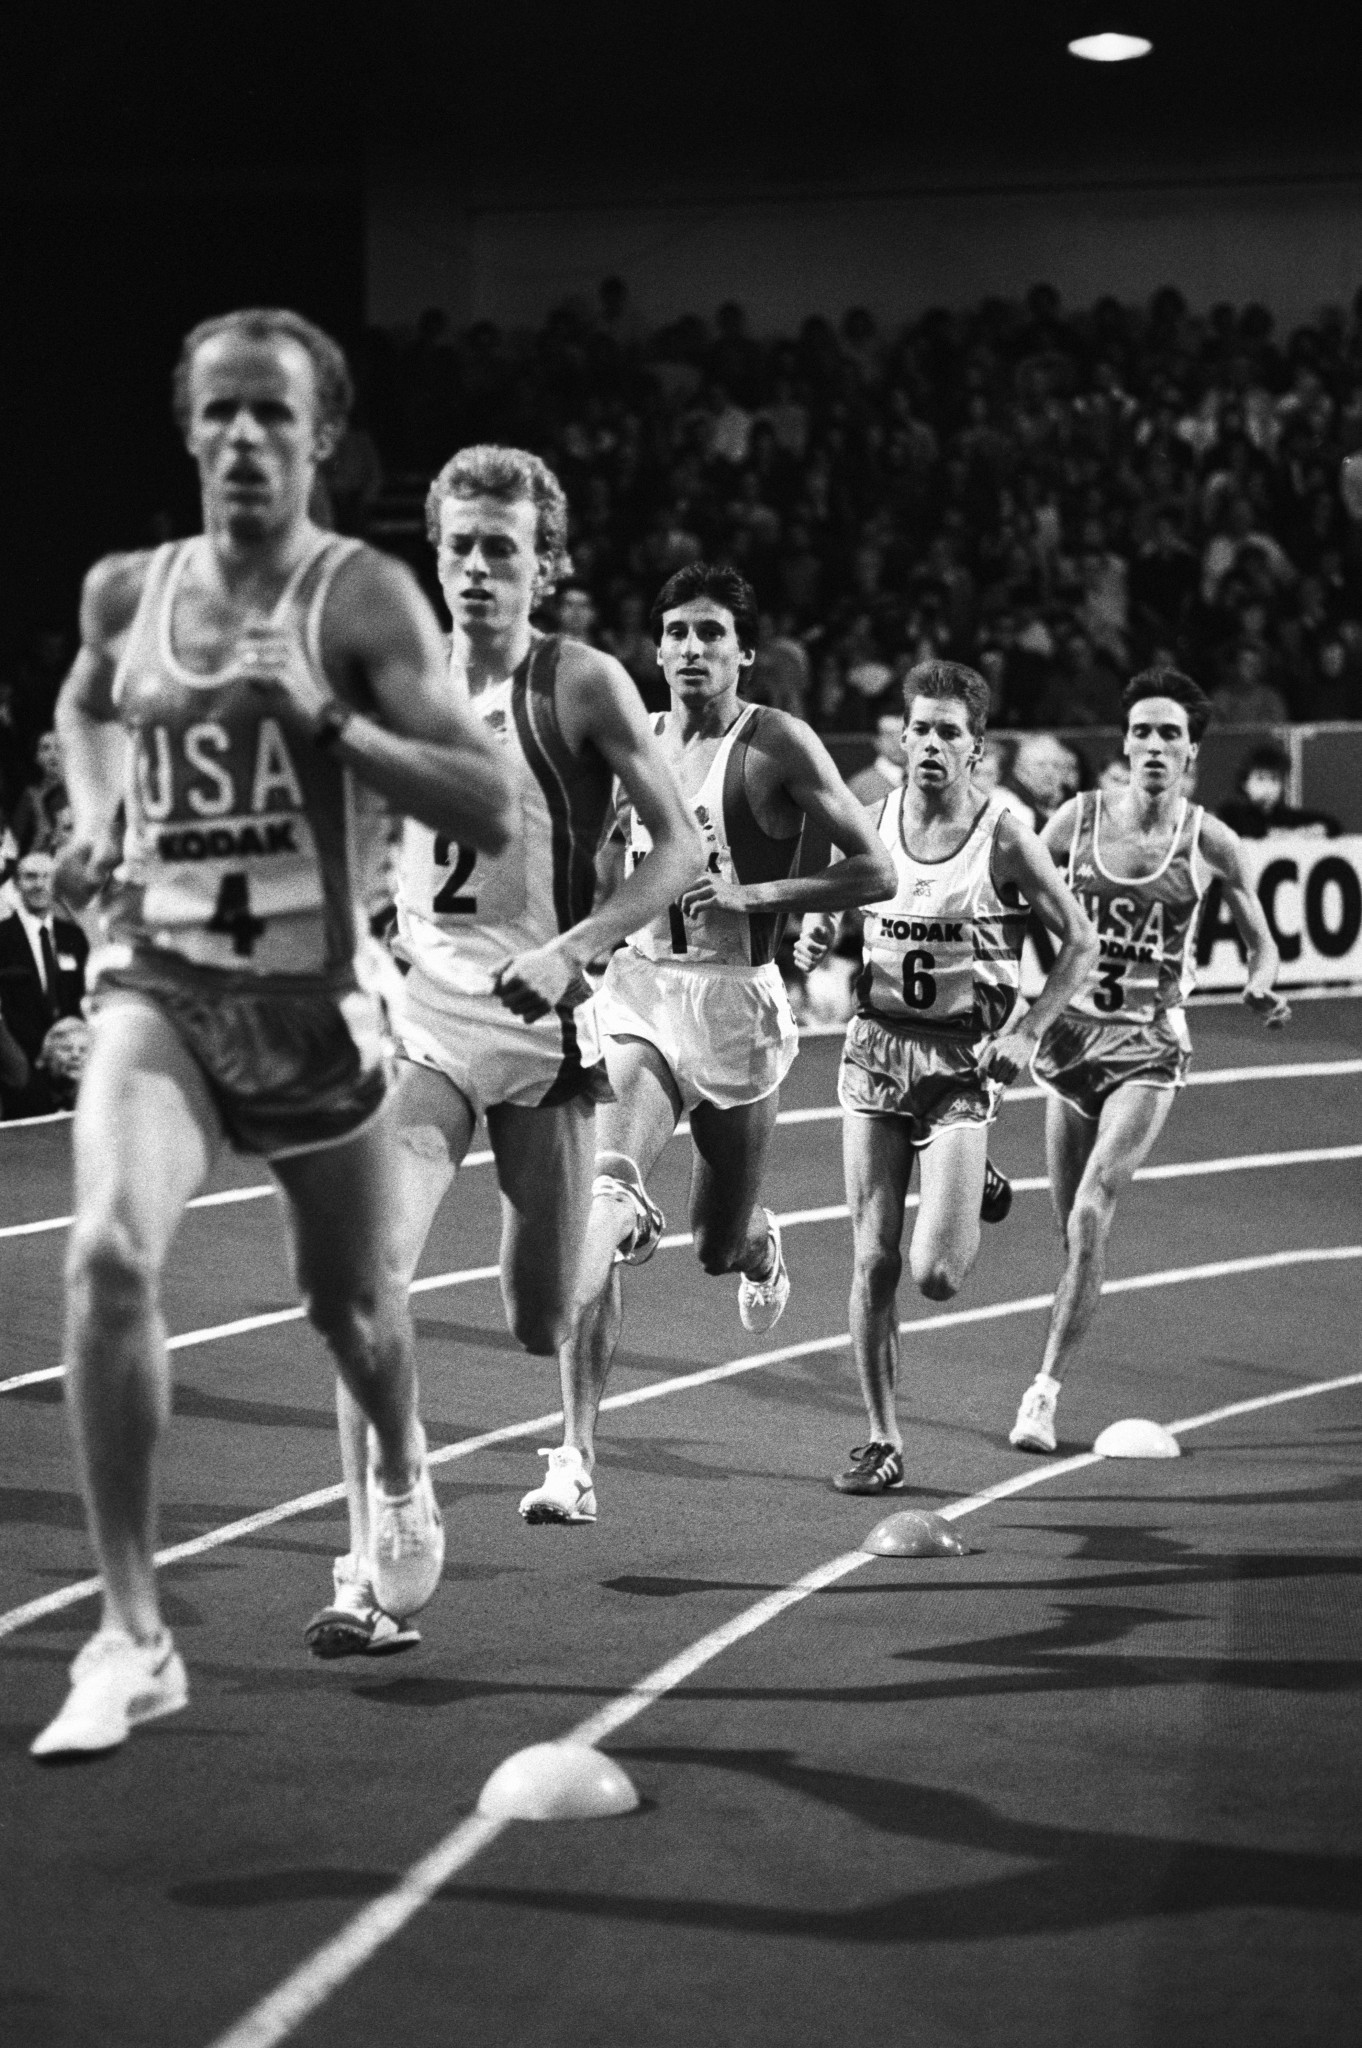 Sebastian Coe, pictured centre running for Britain against the United States in 1988 at the RAF Cosford track on which he set world indoor 800m records in 1981 and 1983 ©Getty Images